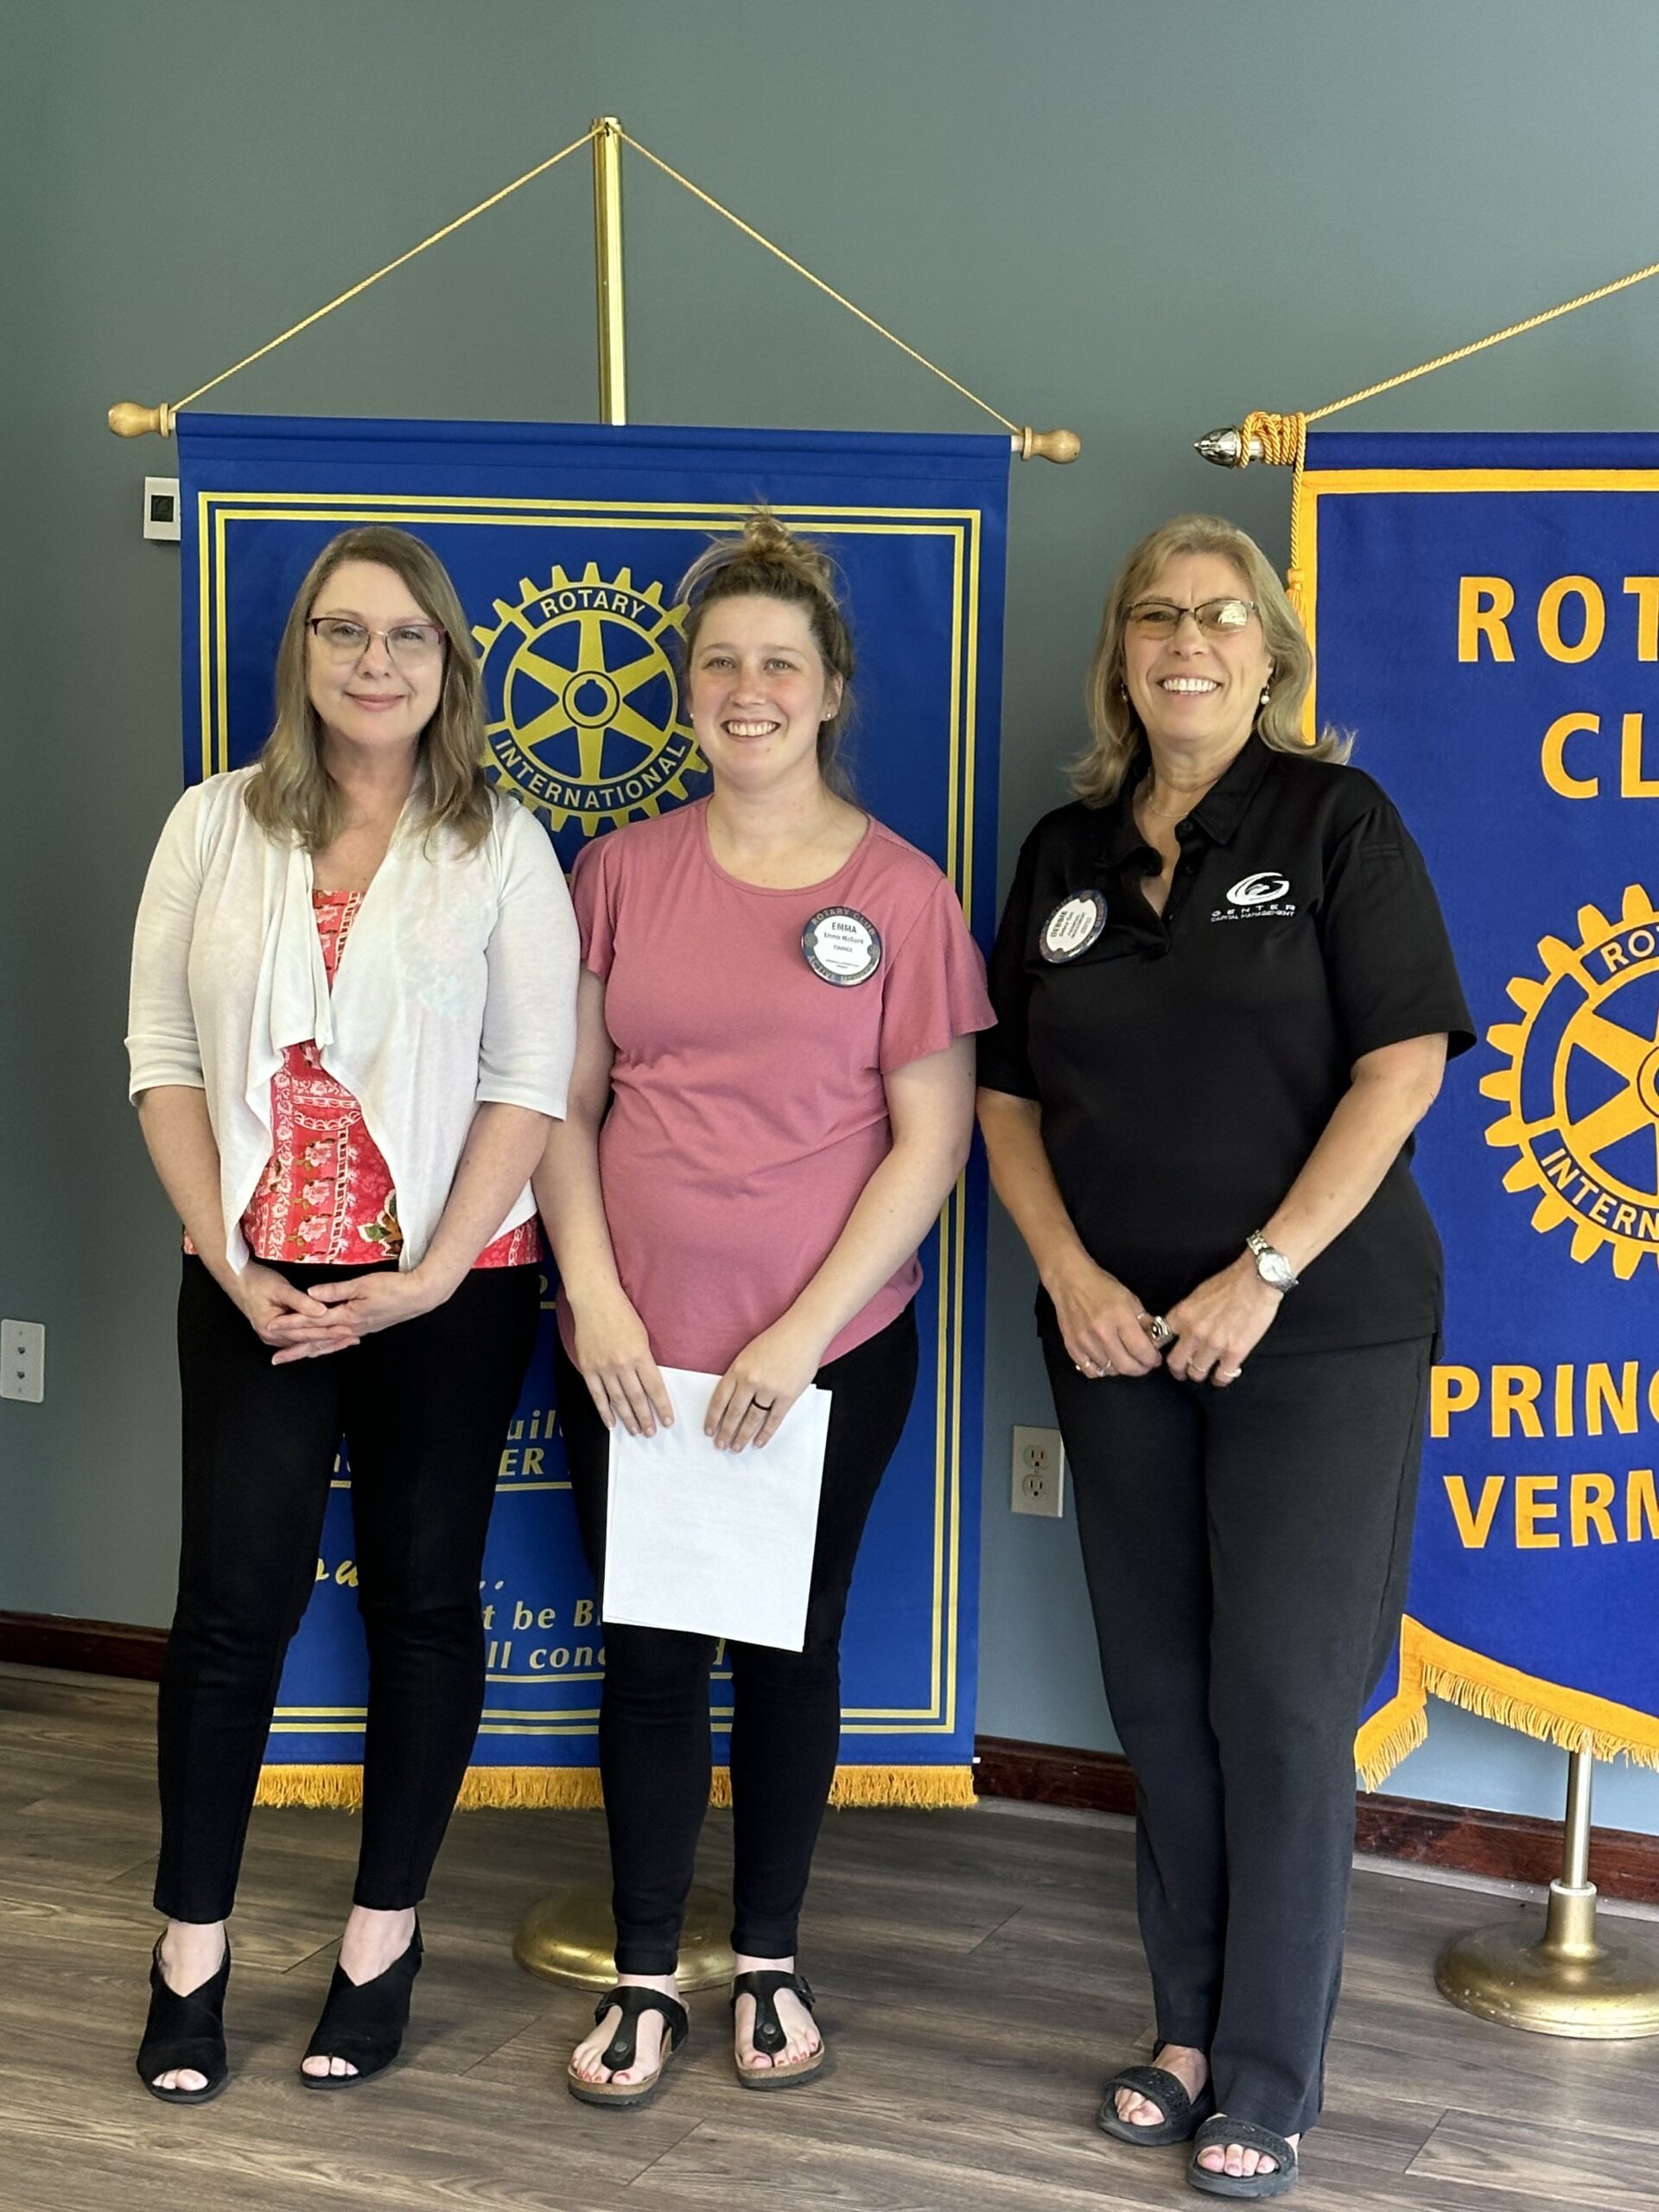 Left to right: Michelle Chamberlain, Rotary Club President Emma McGuirk, and Rotary Club President-elect Deb Cox. Photo provided